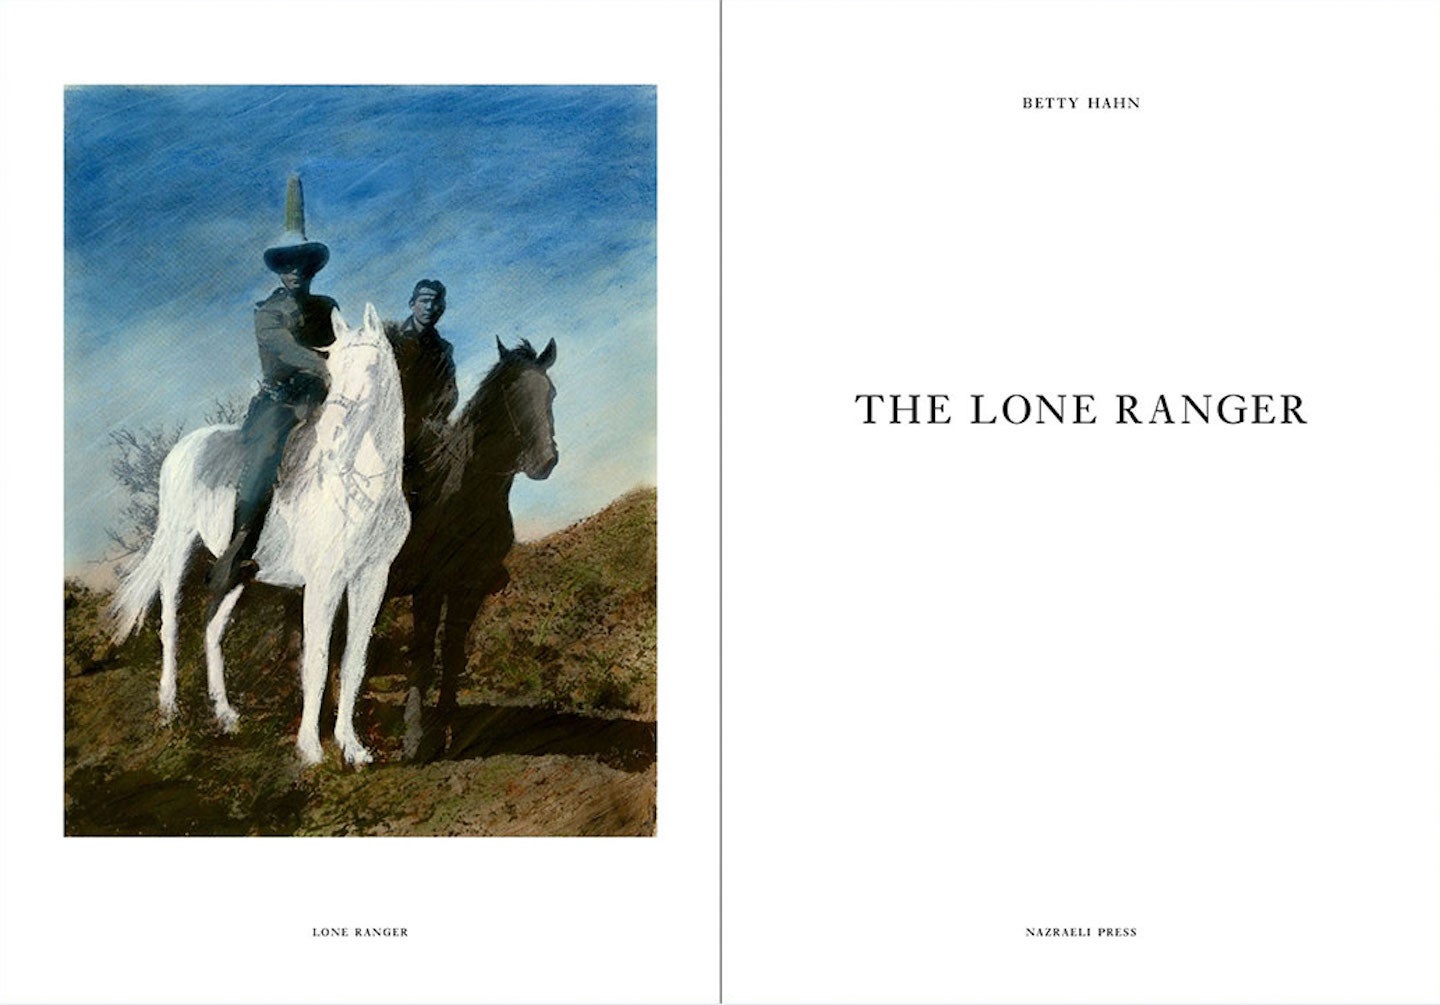 Nazraeli Press One Picture Book Two Series, Set 1: #1-4, Limited Edition(s) (with 4 Prints): Michael Kenna: DMZ (Korean Demilitarized Zone); Tony Mendoza: Florida Dogs; Betty Hahn: Lone Ranger; Carrie Mae Weems: Monument